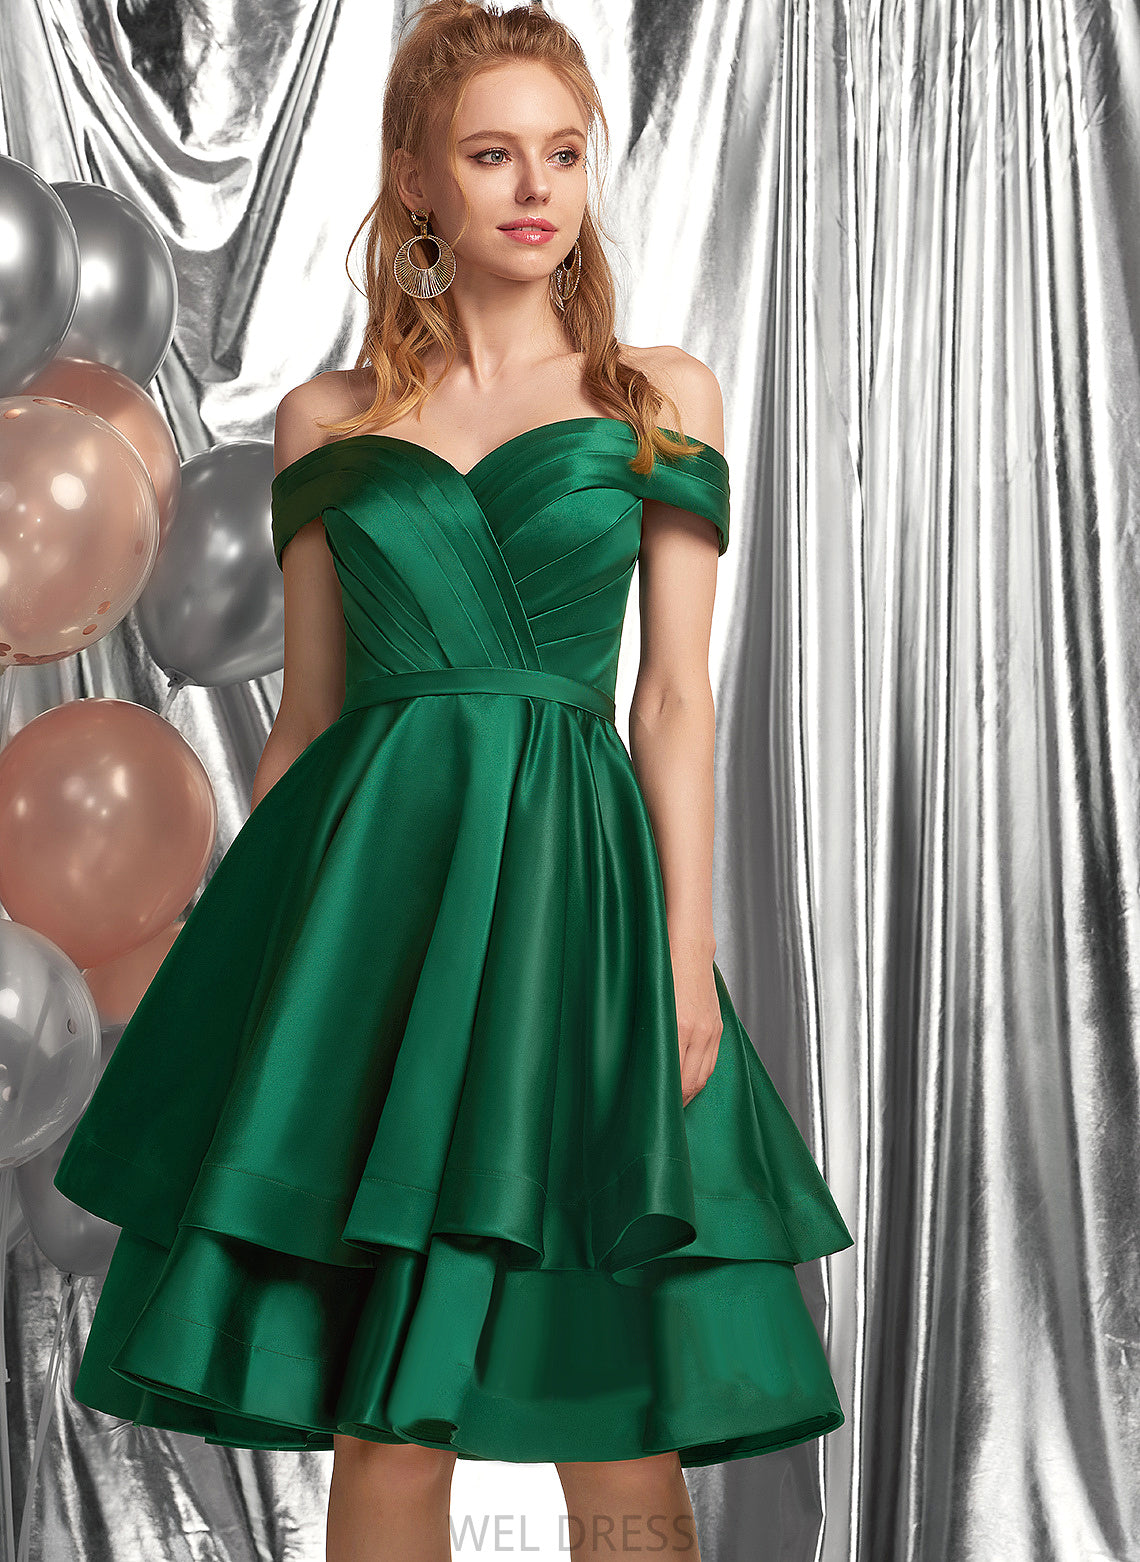 With Homecoming Dresses Knee-Length Ruffle Aubrey Satin Dress Homecoming A-Line Off-the-Shoulder